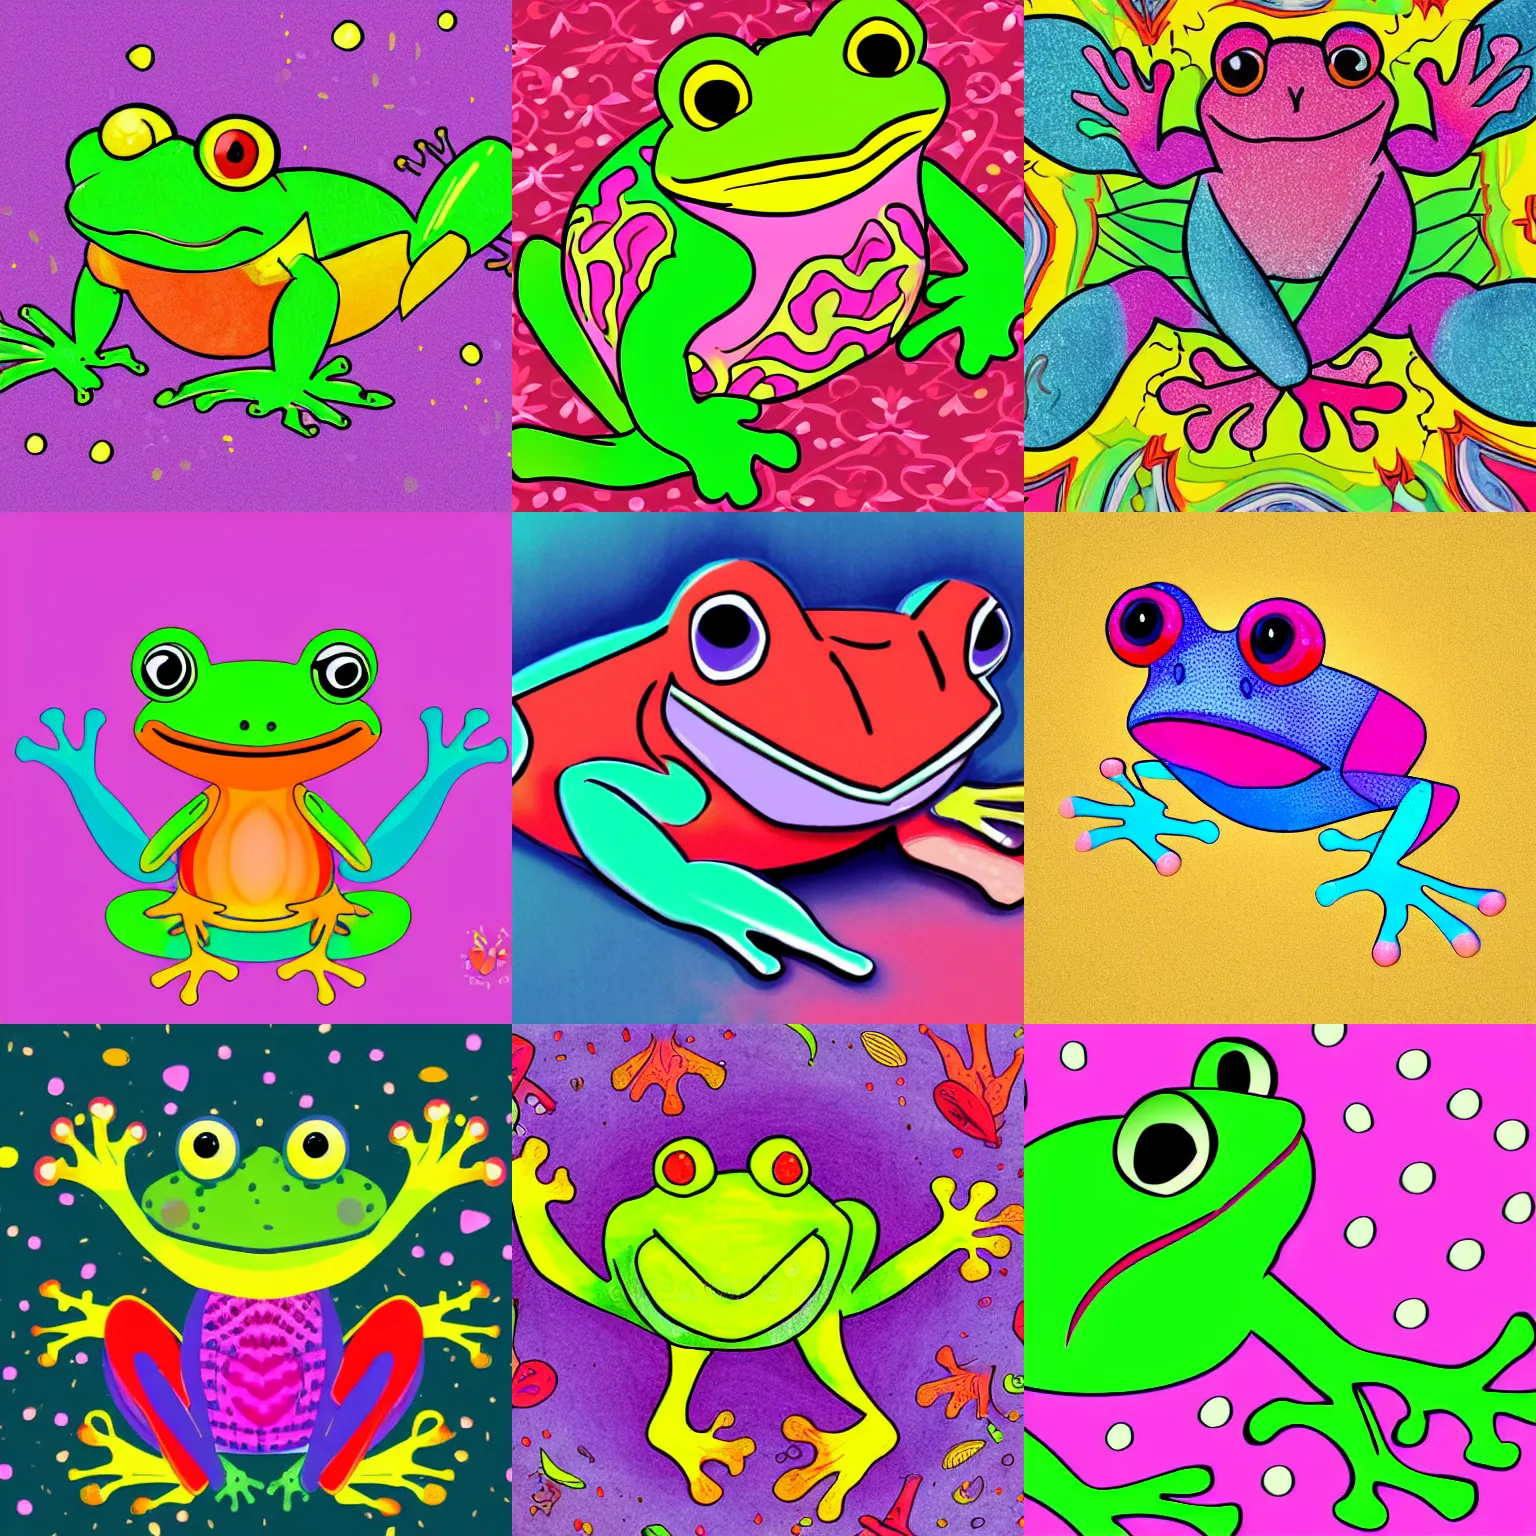 Prompt: a flamboyant whimsical frog, colorful illustration